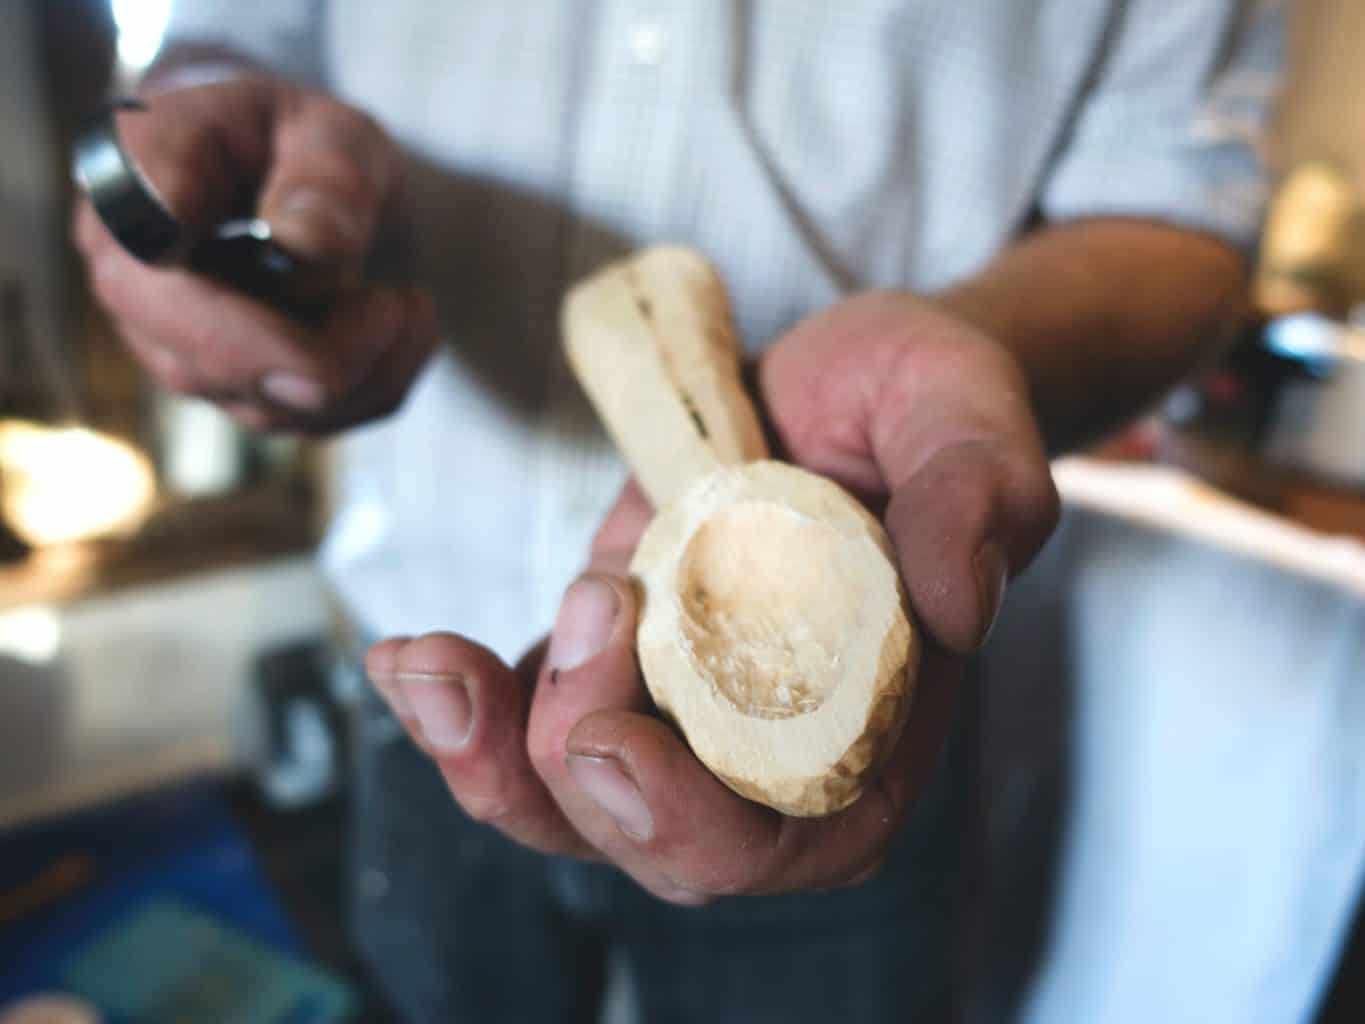 A wooden carving of a small spoon